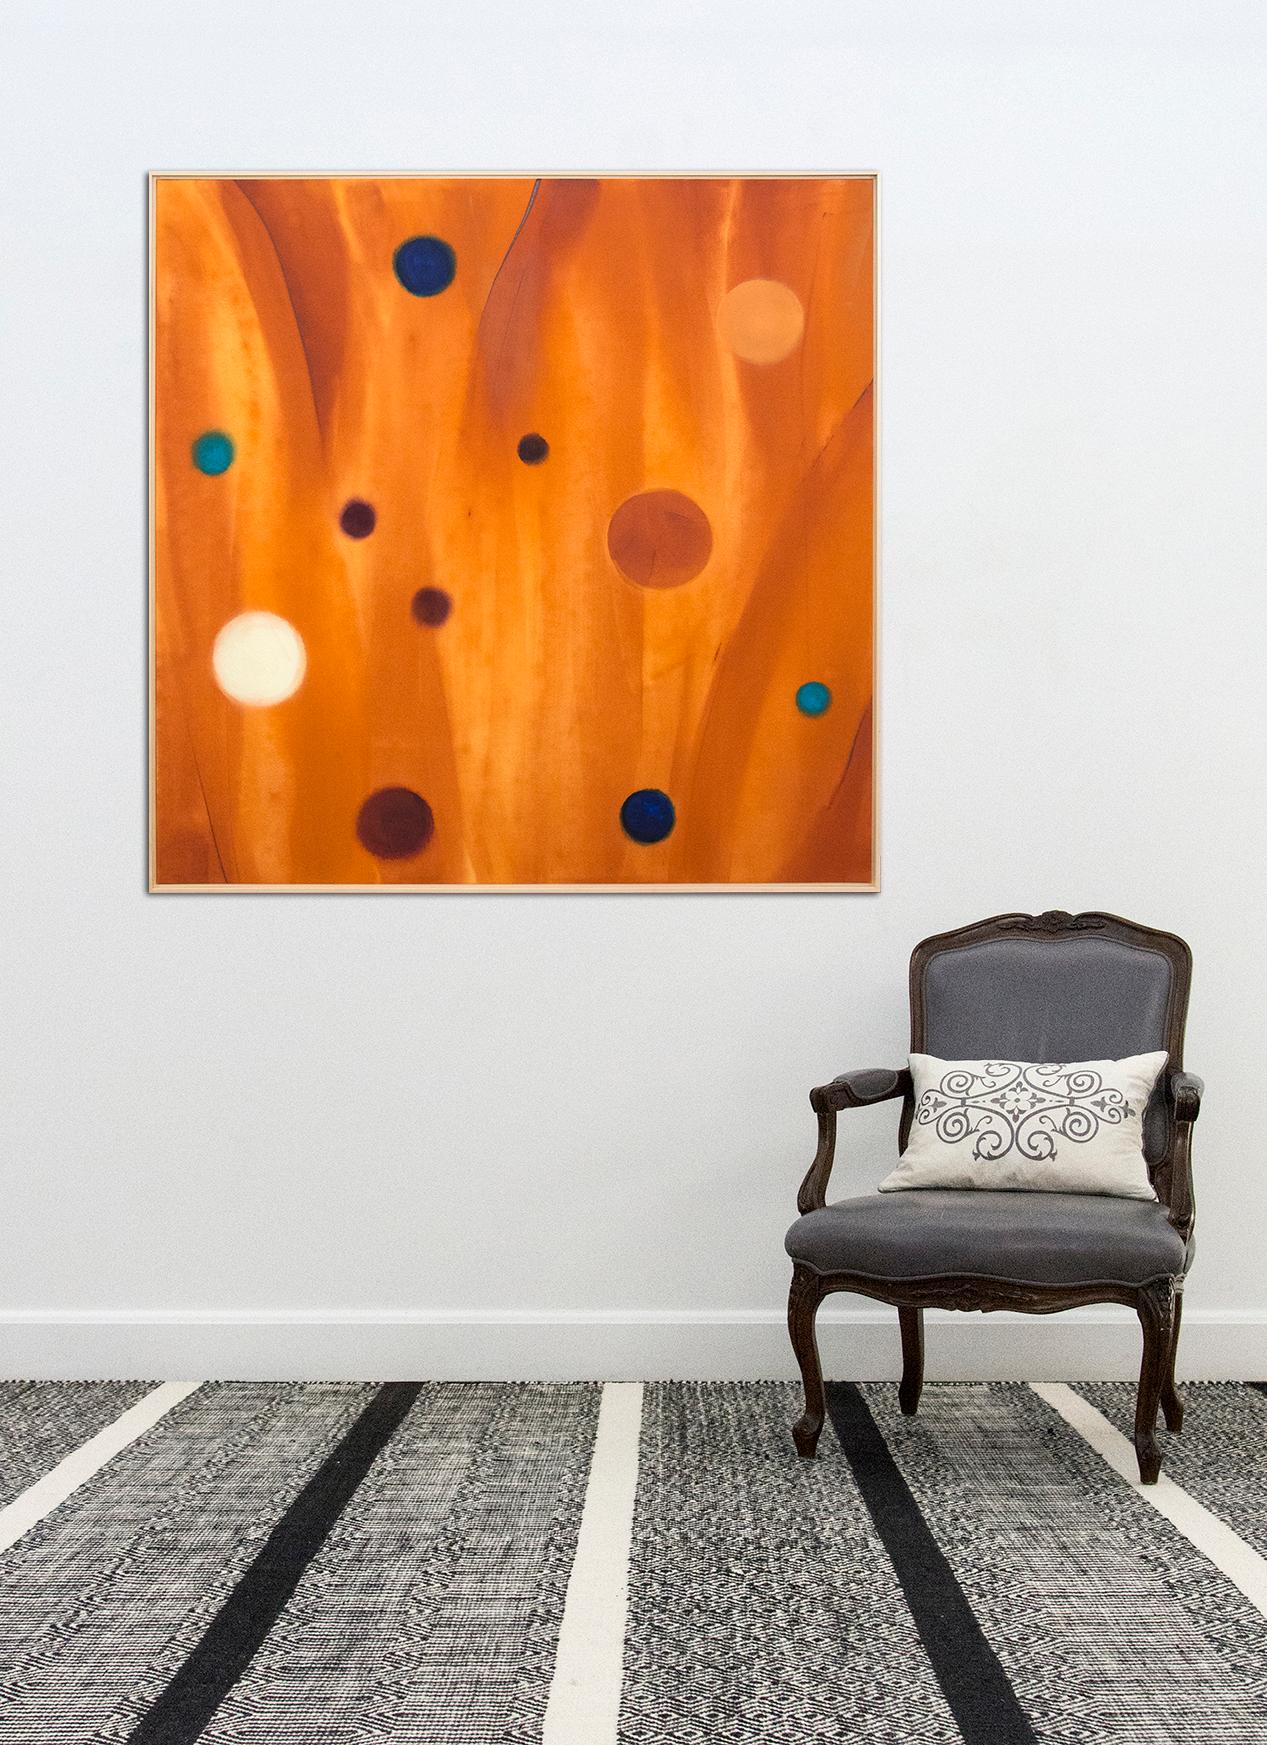 Mott Continuum - large, bright, orange, geometric abstraction, acrylic on canvas - Orange Abstract Painting by Milly Ristvedt